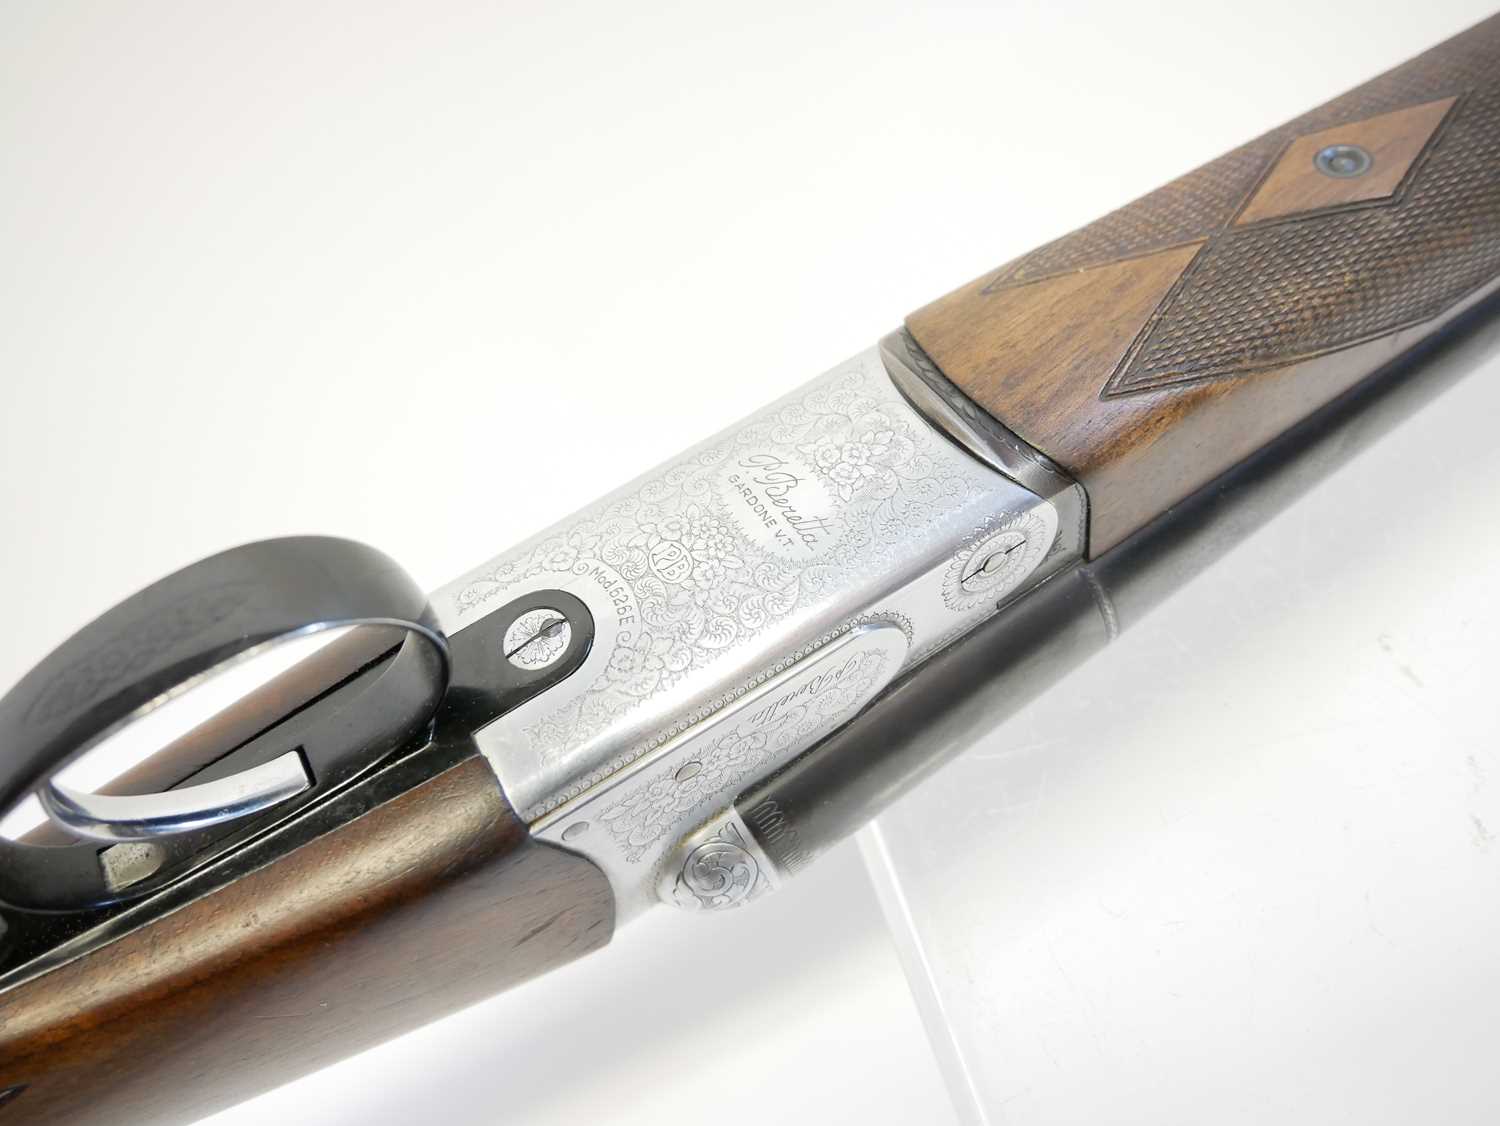 Beretta 12 bore side by side Model 626E shotgun, serial number A40366A, 28inch barrels with half and - Image 7 of 15